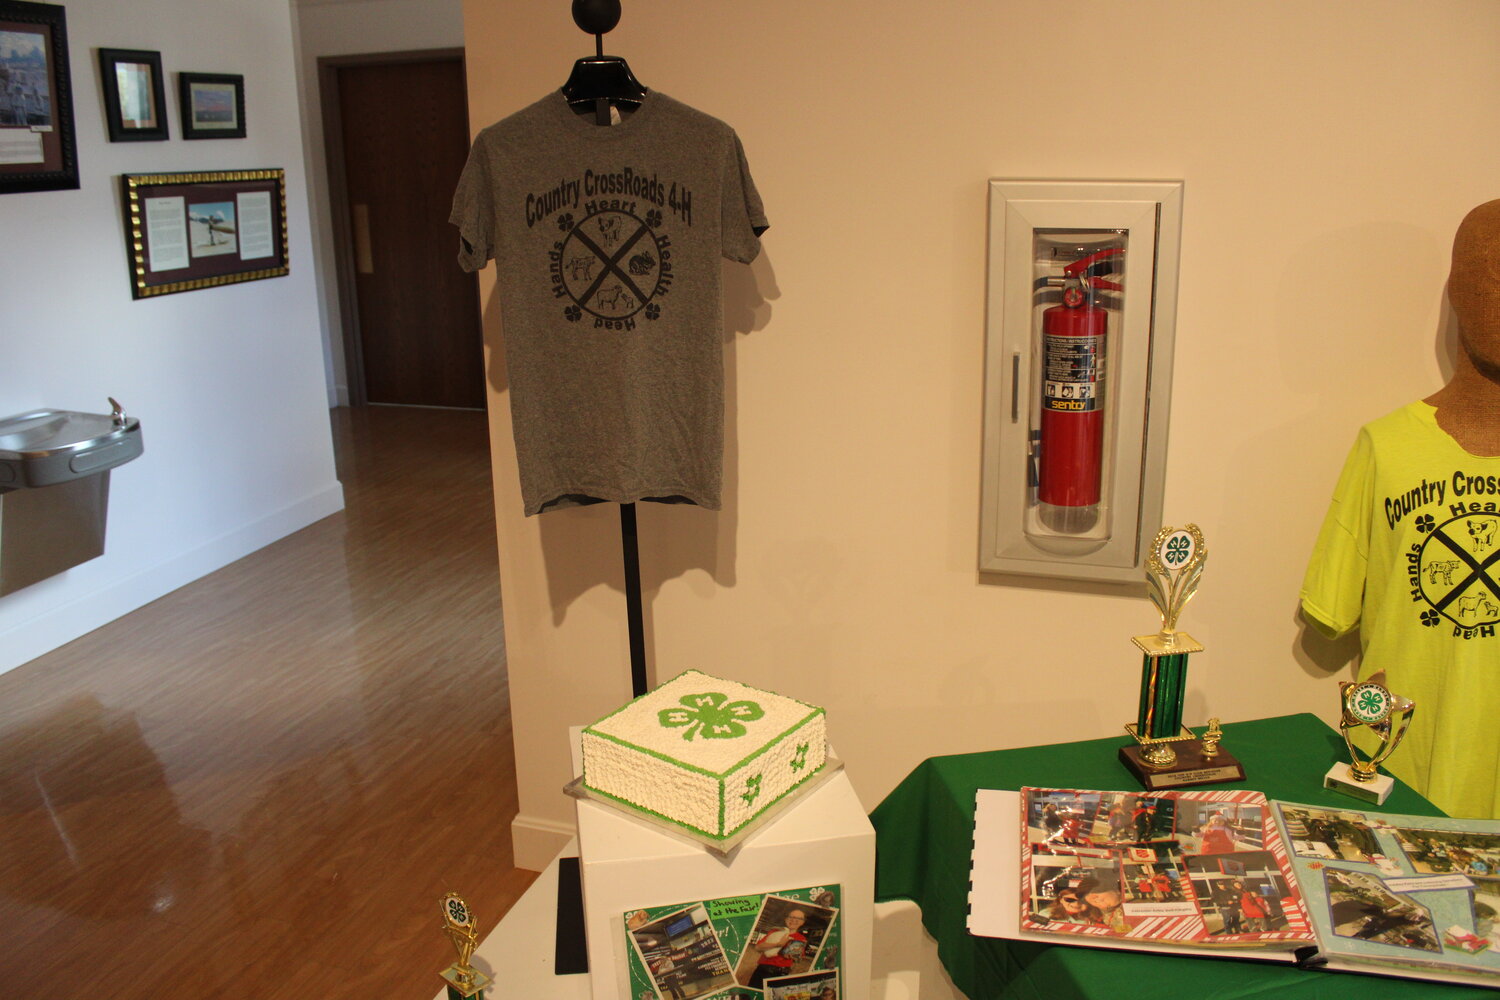 This cake is part of the 4-H display at the current exhibit at the Historical Society.